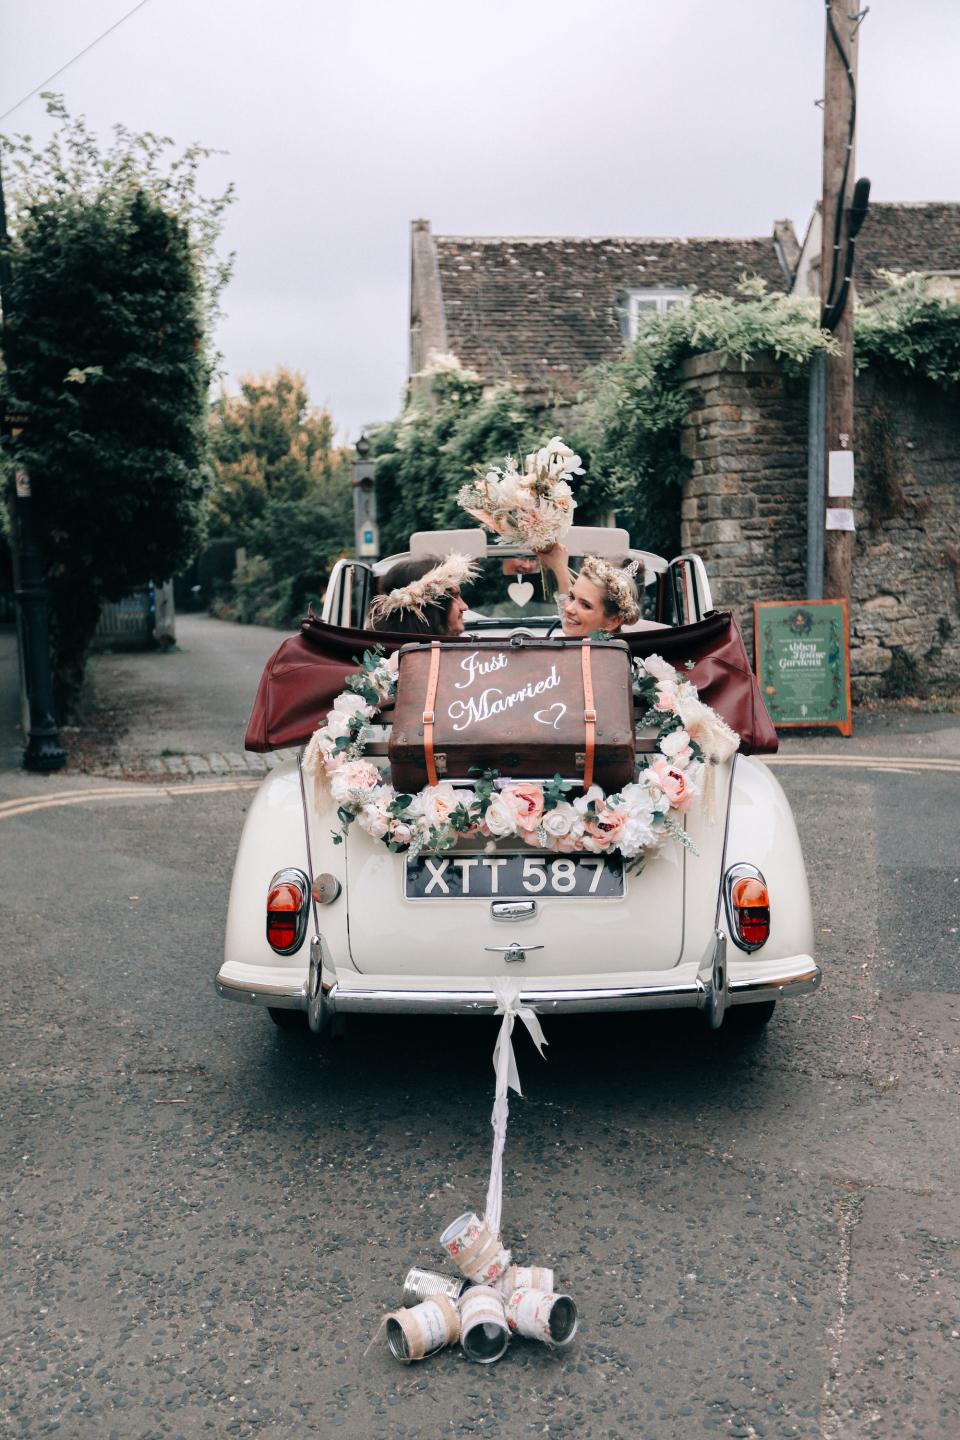 A couple rides in a white convertible that is decorated with "just married" on the back.